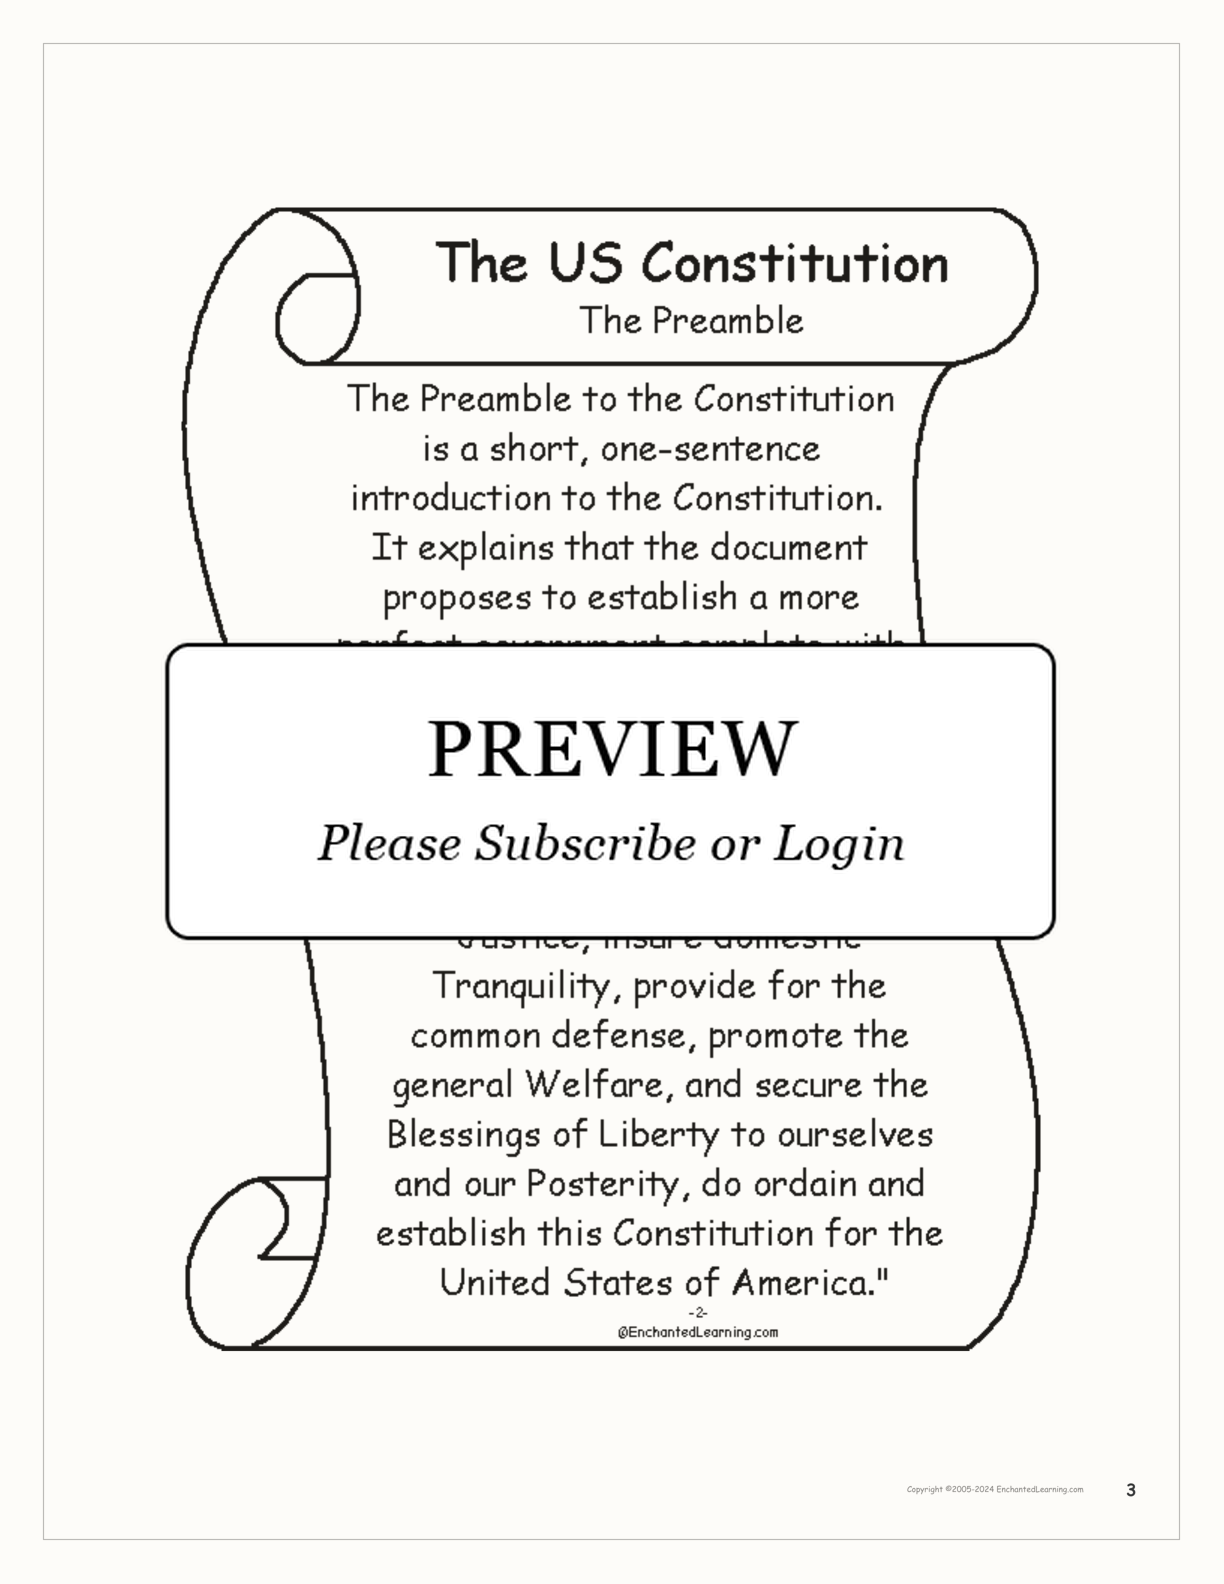 US Constitution Book interactive printout page 3